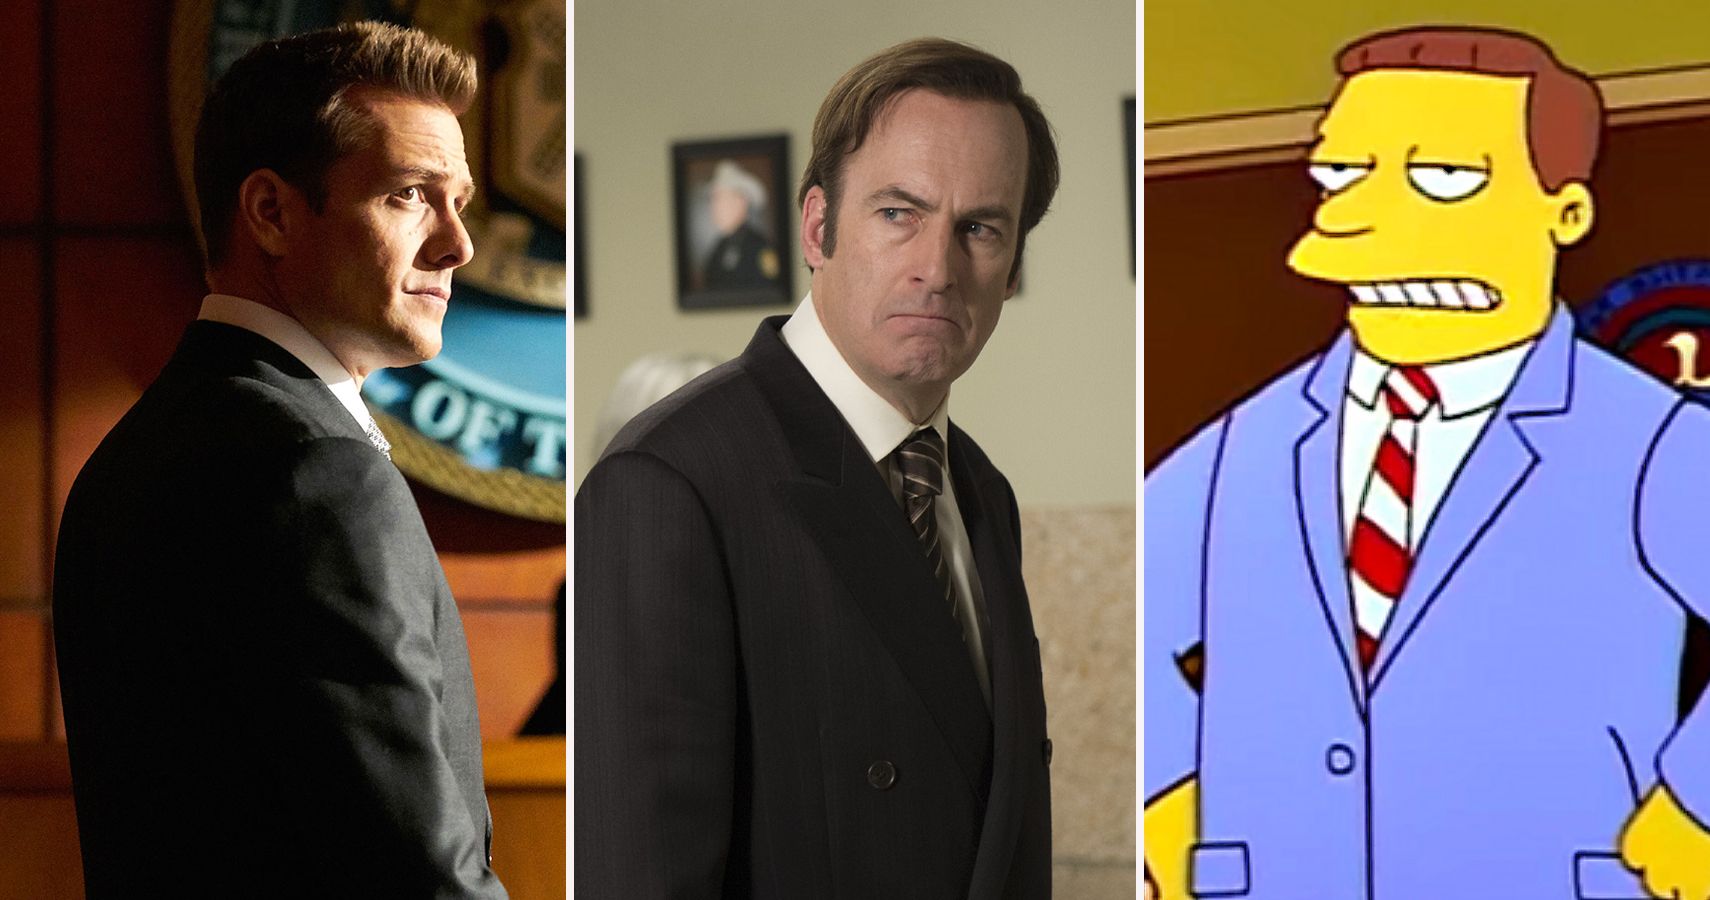 The 5 Best 5 Worst TV Lawyers Of All Time featured image